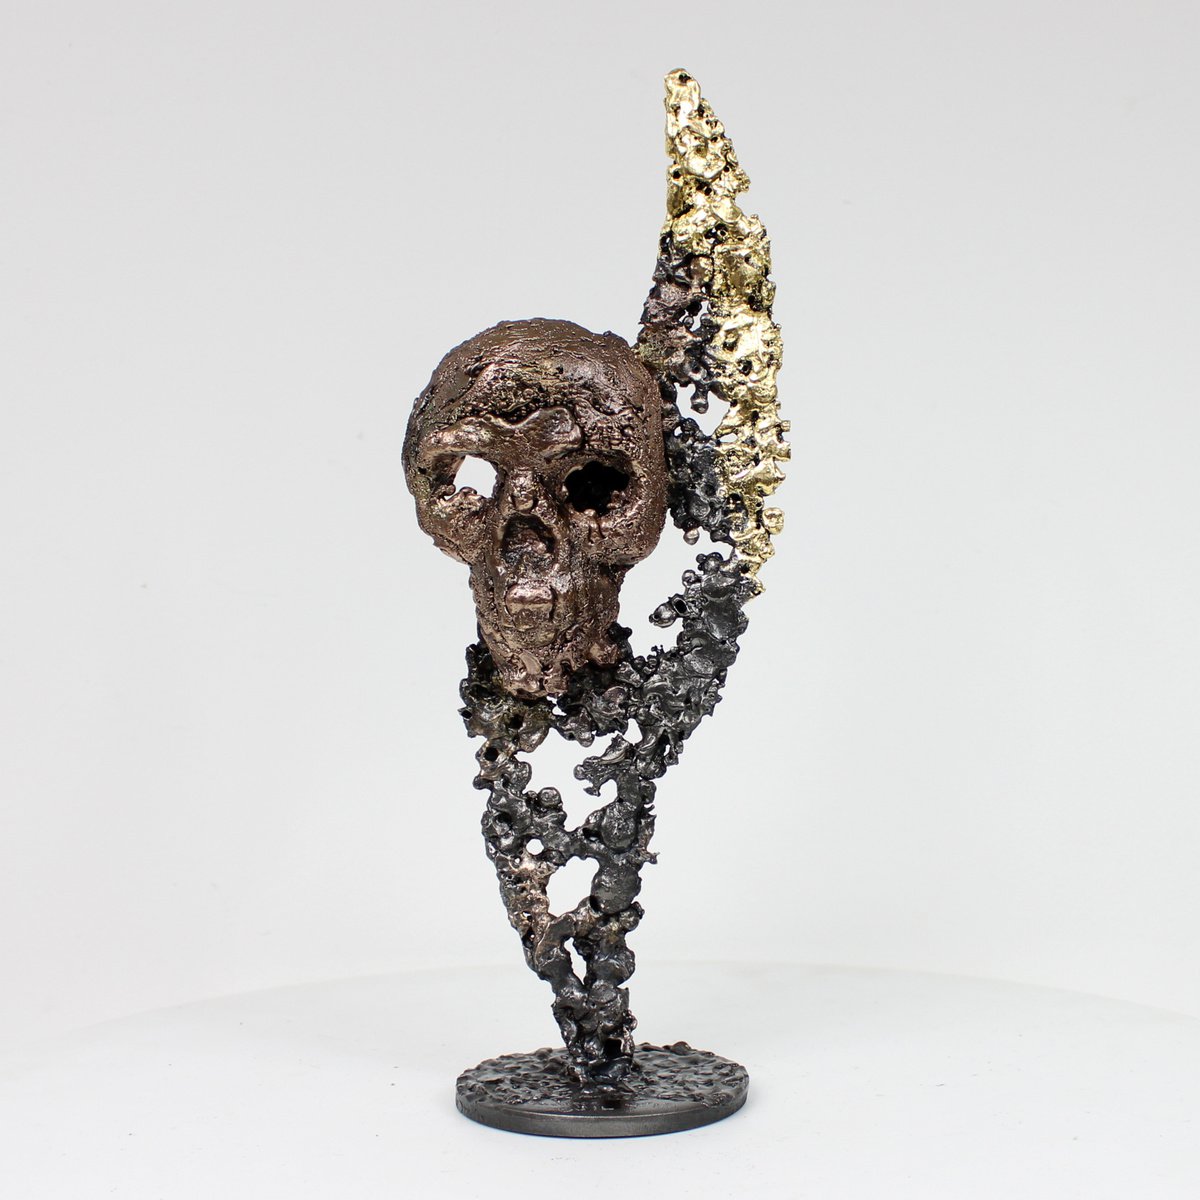 Flame skull 40-22 - Skull on flame metal sculpture by Philippe Buil